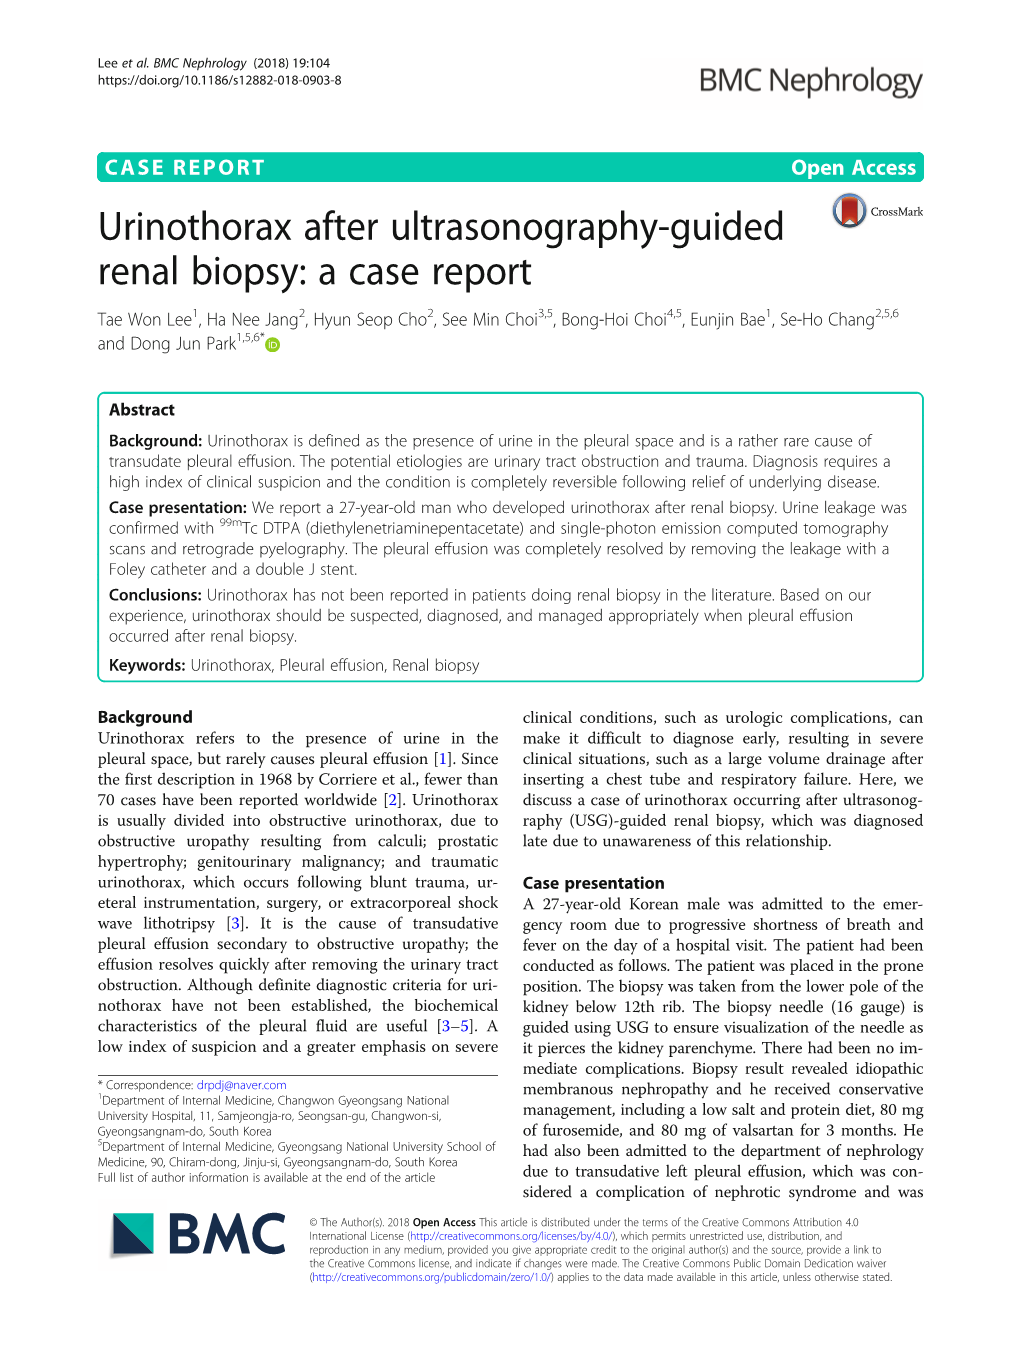 Urinothorax After Ultrasonography-Guided Renal Biopsy